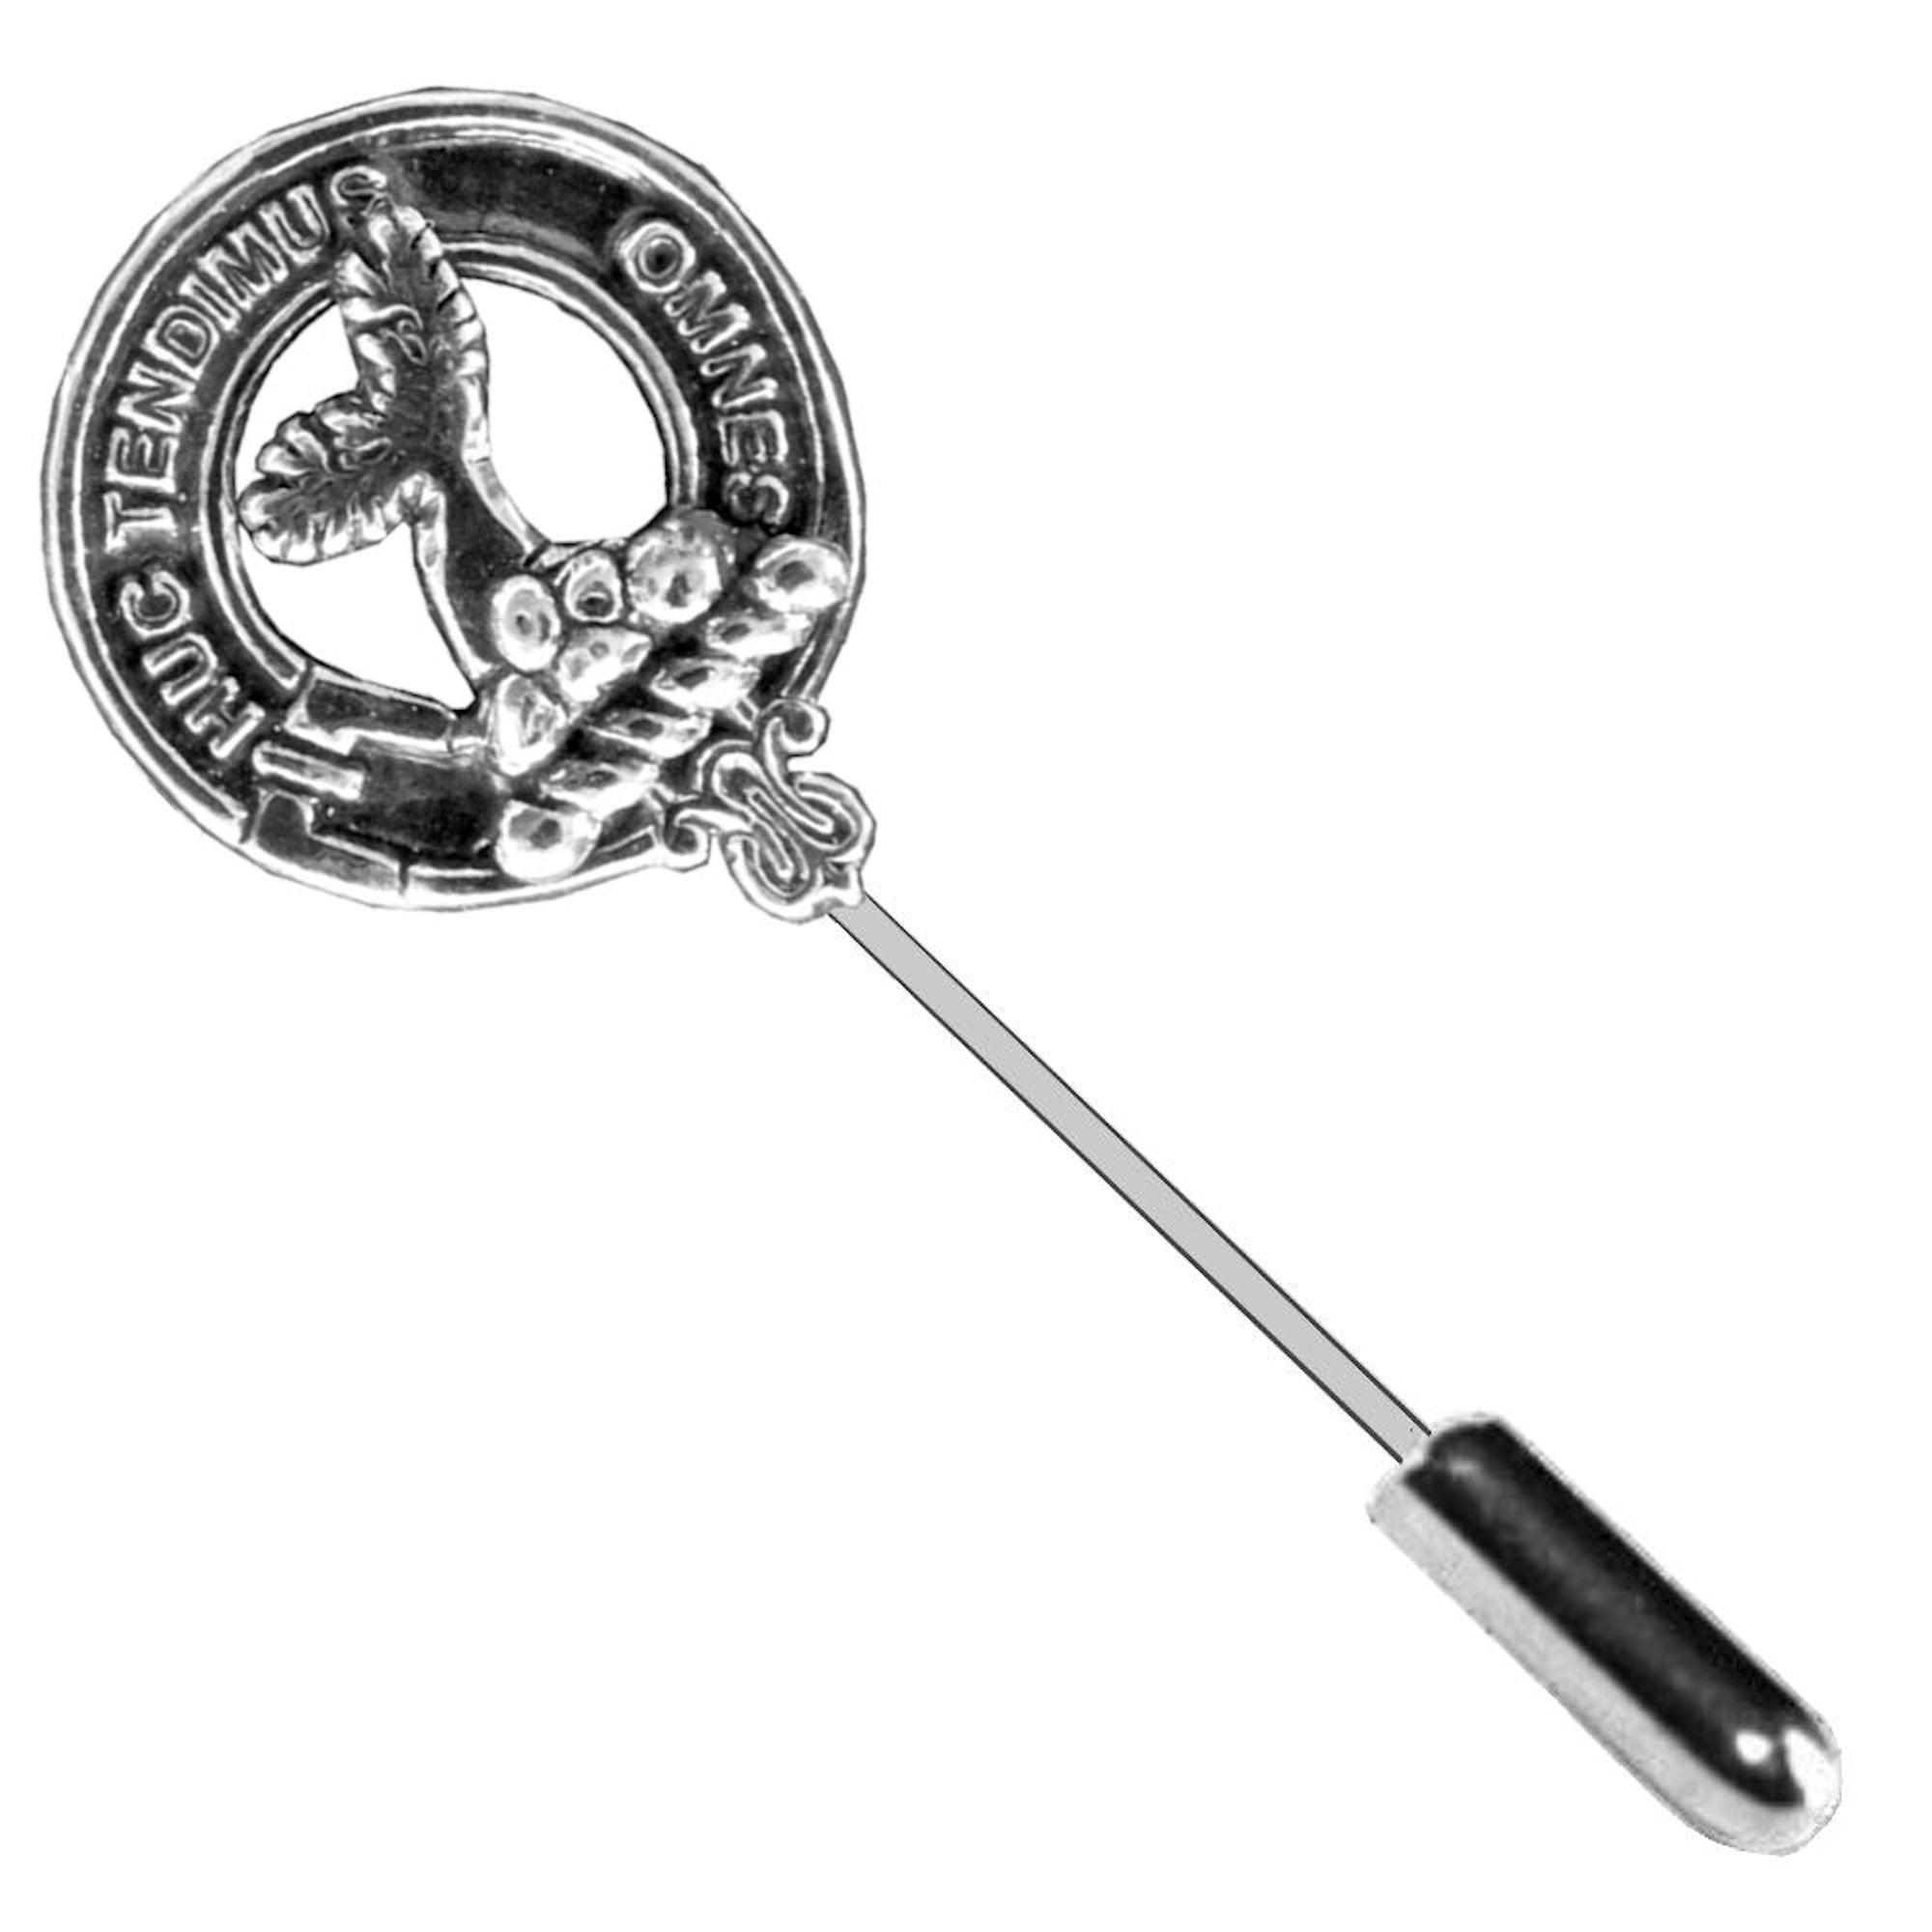 Patterson Clan Crest Stick or Cravat pin, Sterling Silver